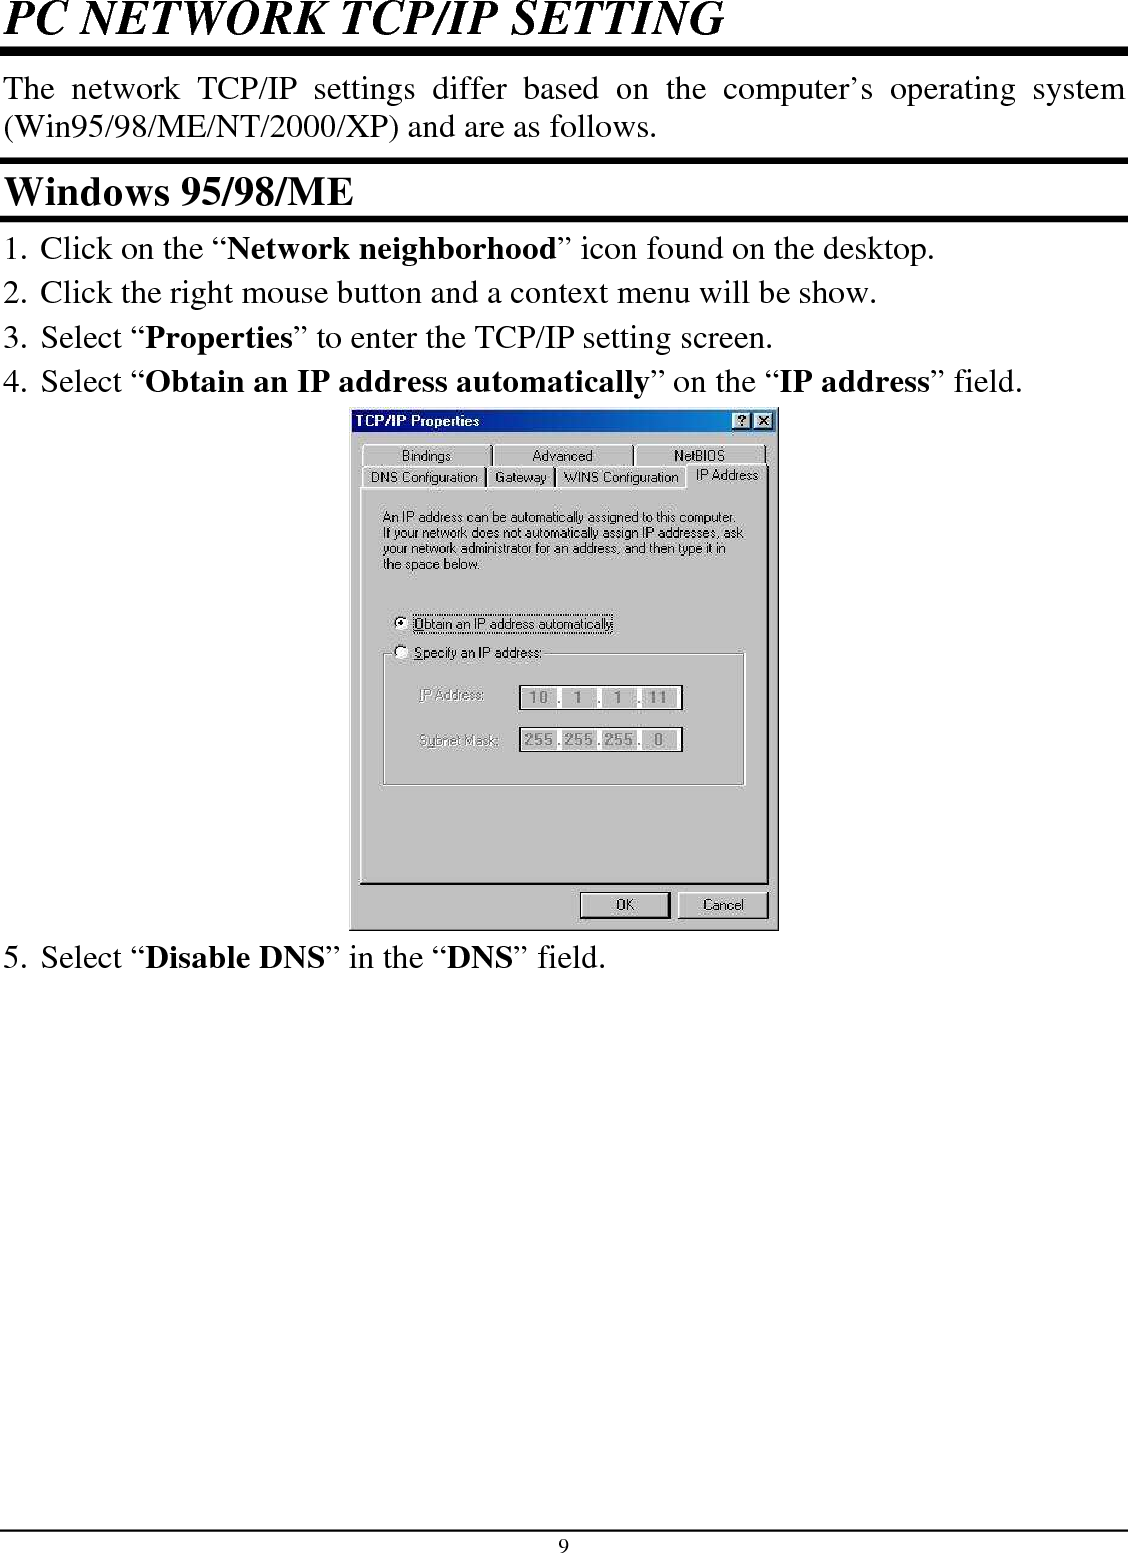 9 PC NETWORK TCP/IP SETTING The  network  TCP/IP  settings  differ  based  on  the  computer’s  operating  system (Win95/98/ME/NT/2000/XP) and are as follows. Windows 95/98/ME 1. Click on the “Network neighborhood” icon found on the desktop.  2. Click the right mouse button and a context menu will be show.  3. Select “Properties” to enter the TCP/IP setting screen.  4. Select “Obtain an IP address automatically” on the “IP address” field.  5. Select “Disable DNS” in the “DNS” field. 